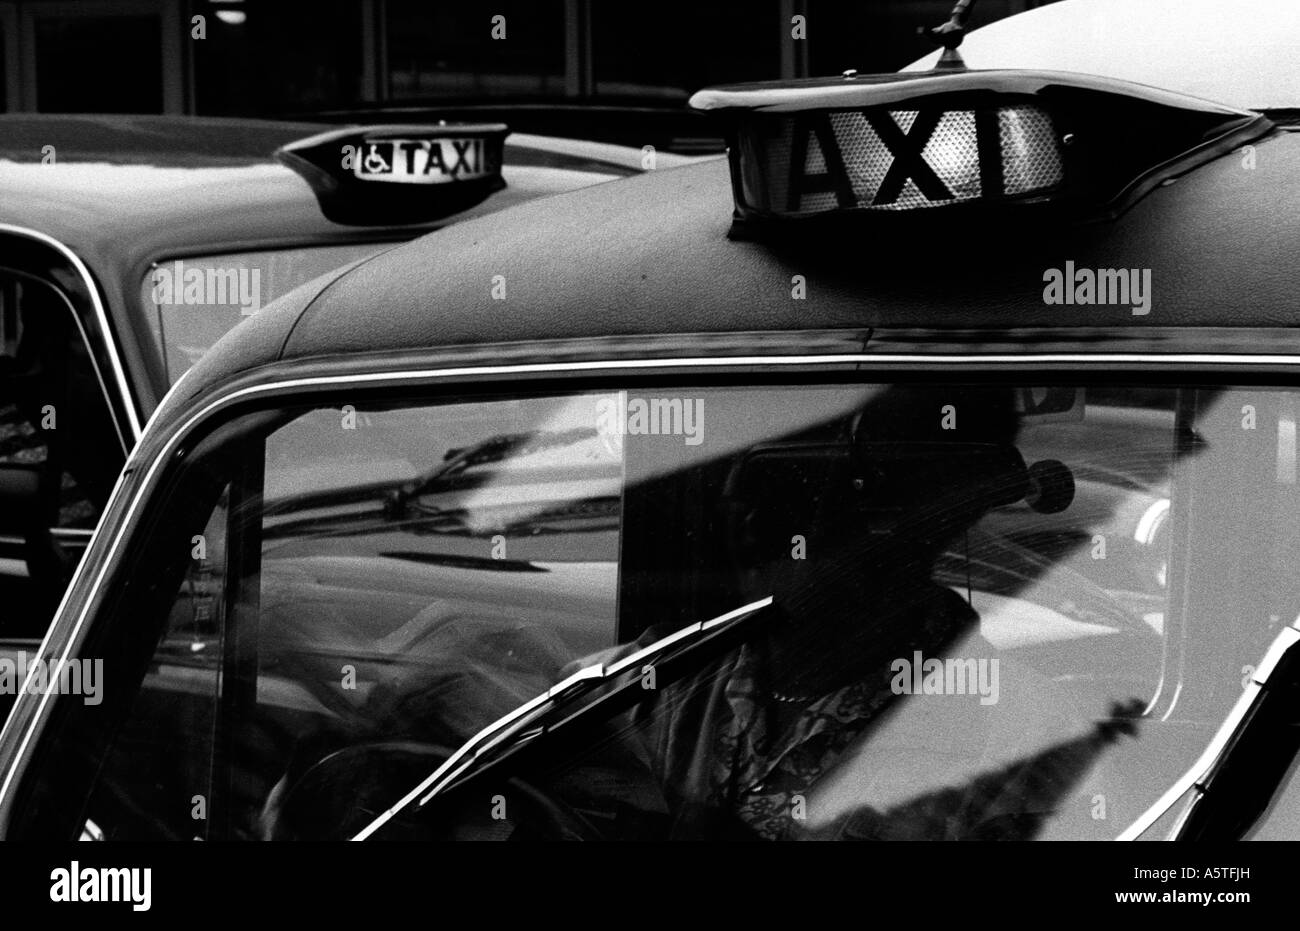 London taxis plying for hire at Waterloo Station, London Stock Photo